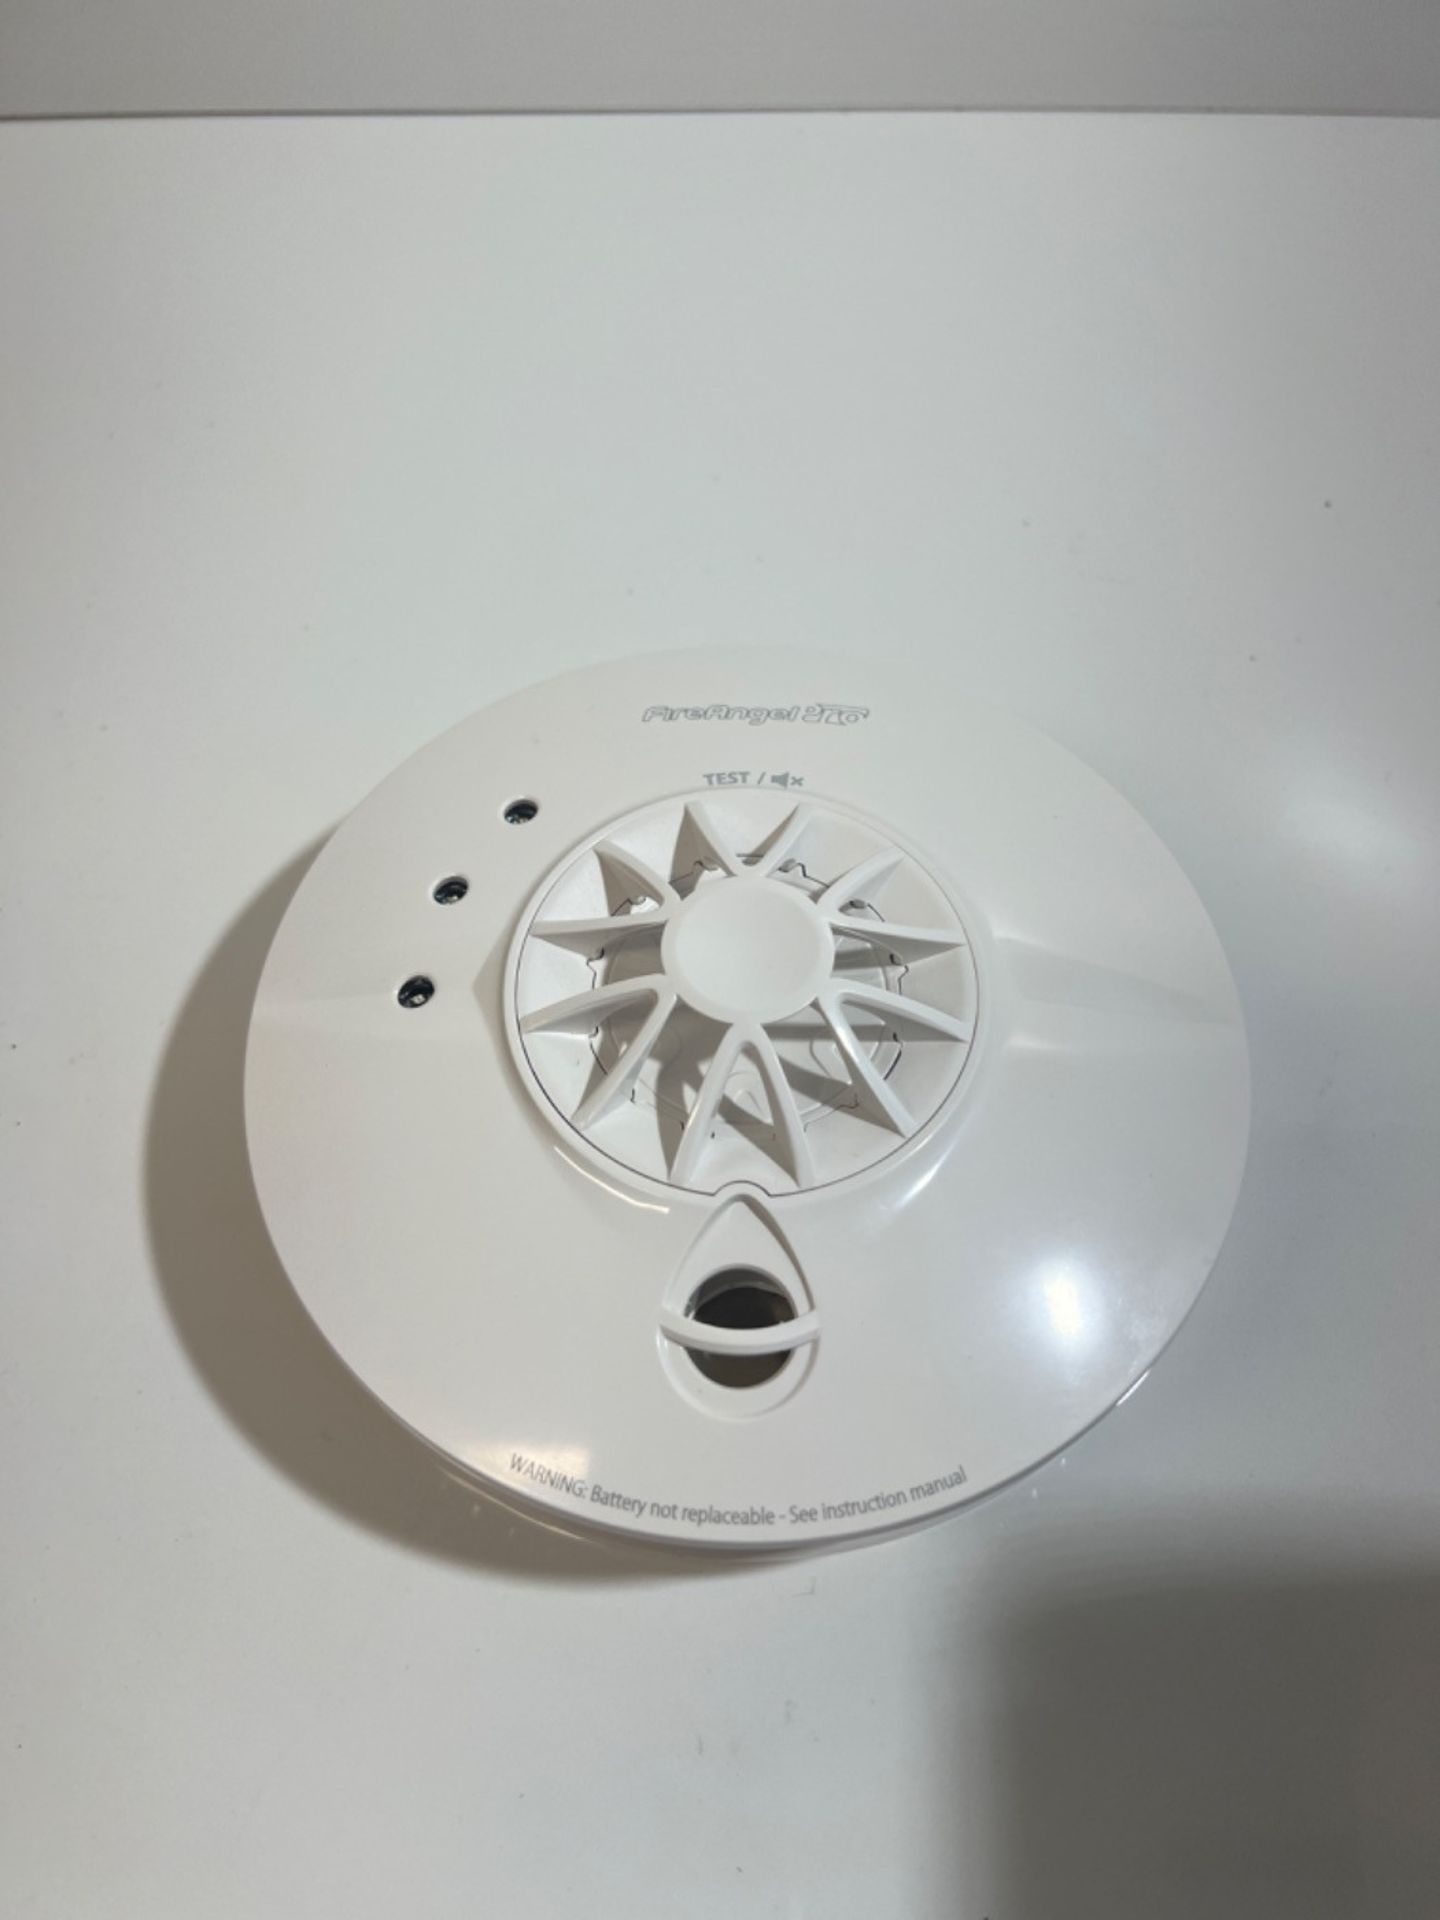 FireAngel Pro Connected Smart Kitchen Heat Alarm, Mains Powered with Wireless Interlink and 10 Year - Image 2 of 2